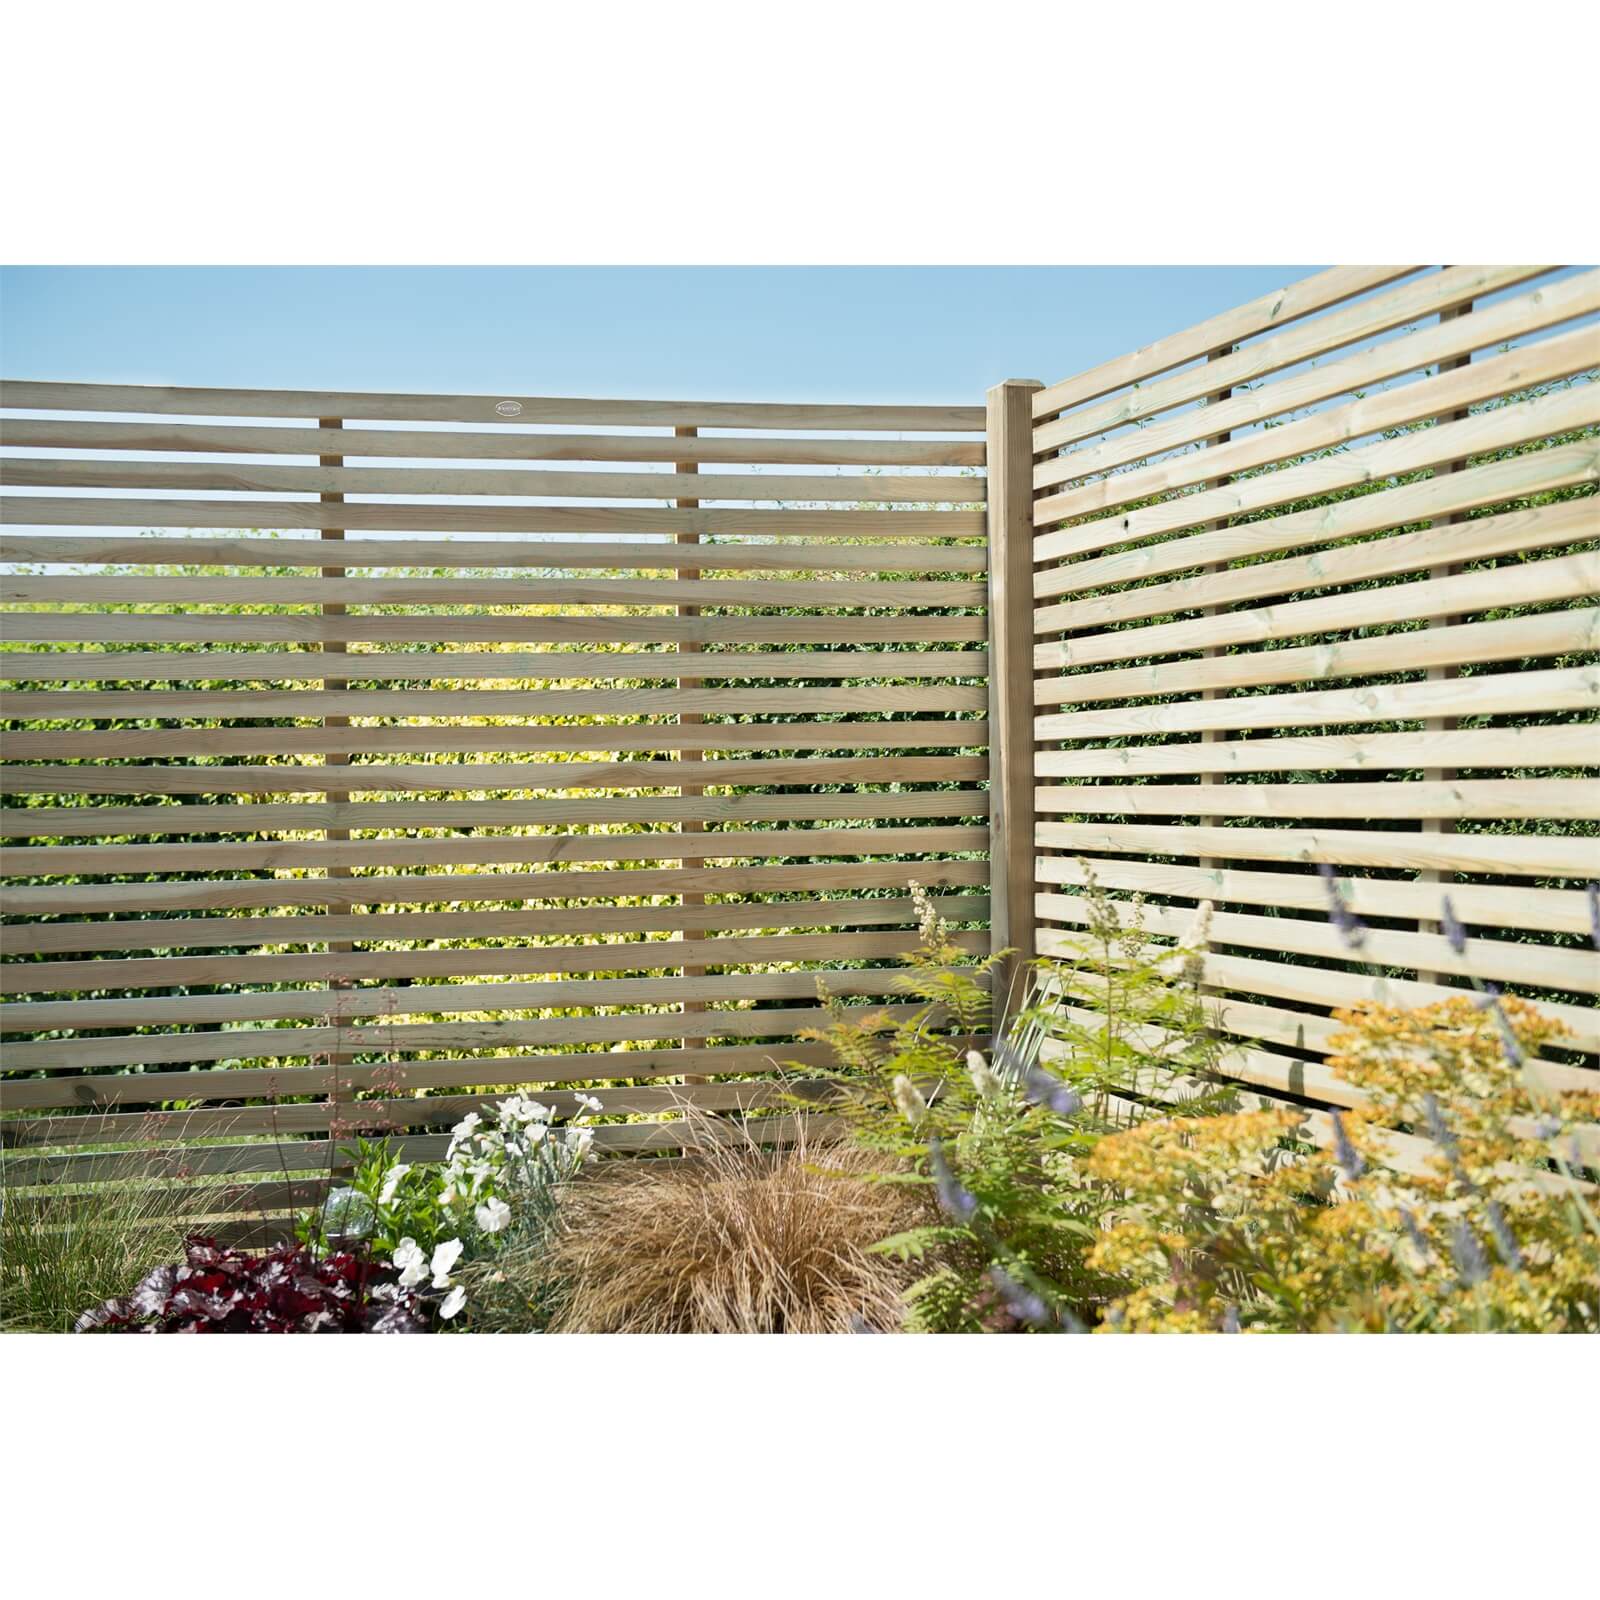 6ft x 5ft (1.8m x 1.5m) Pressure Treated Contemporary Slatted Fence Panel - Pack of 4